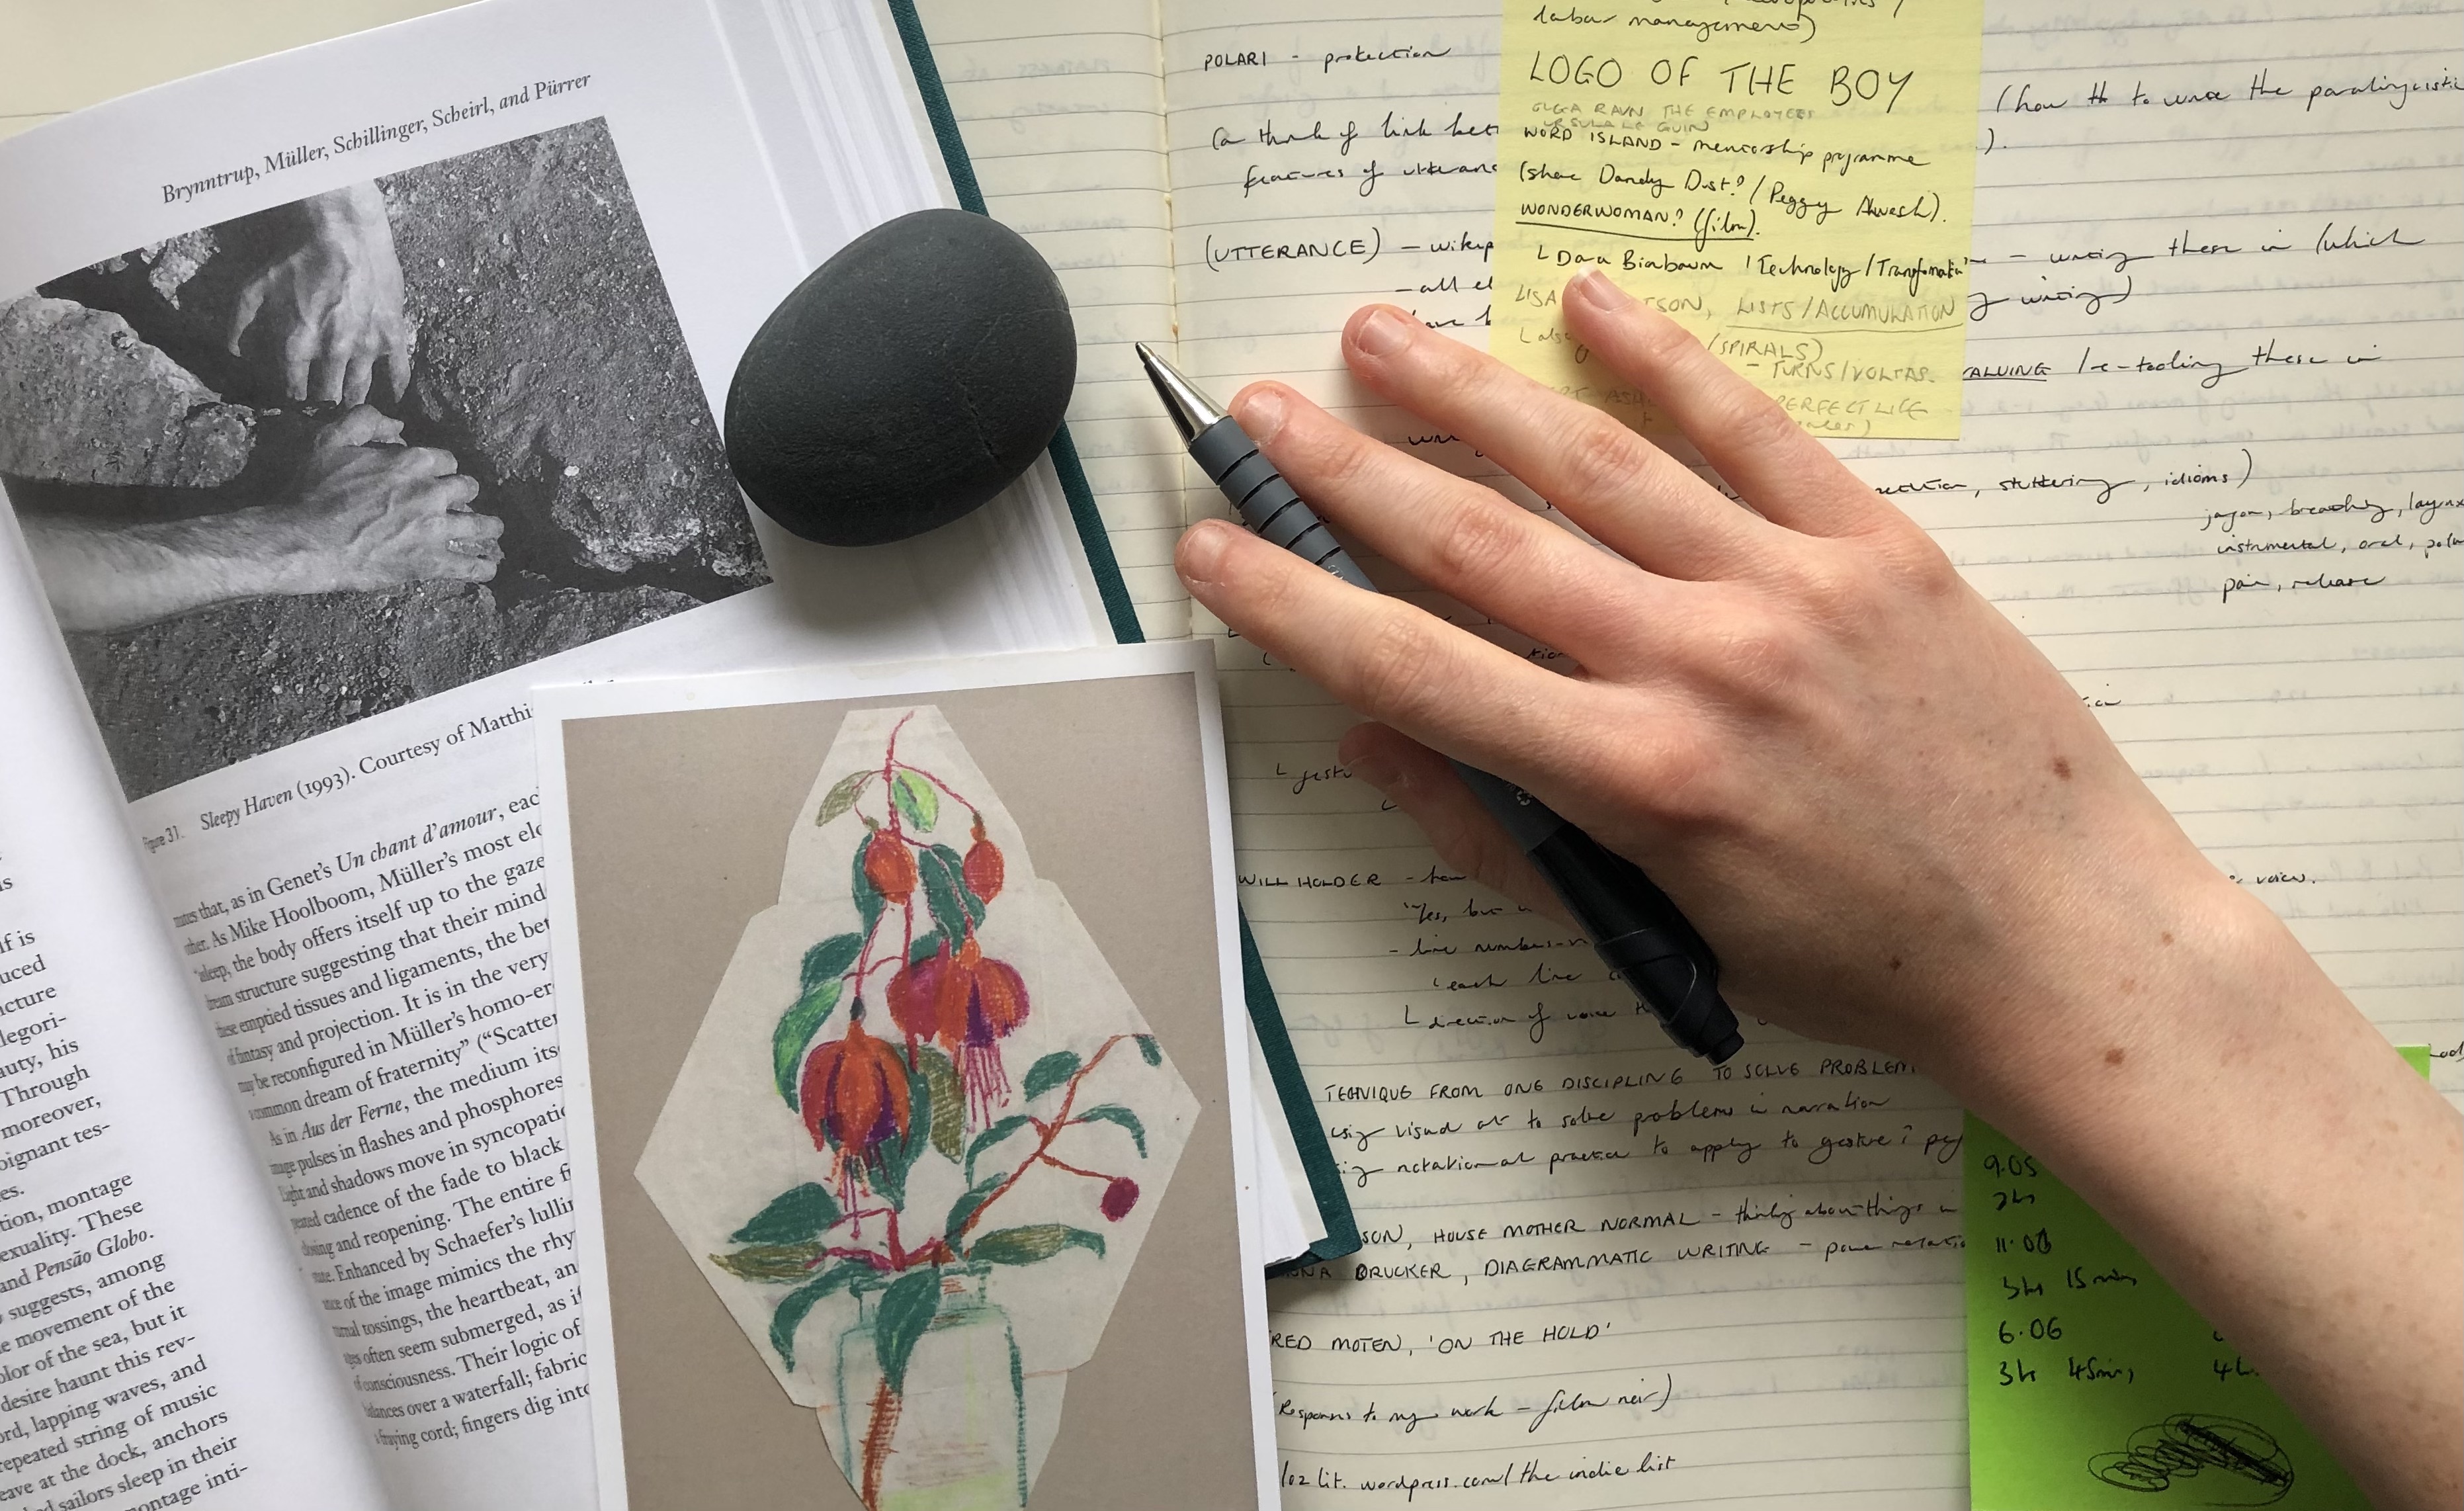 image shows a white person’s hand holding a pen over a notebook page covered in writing and post-it notes. Covering the left side of the page is a book, open on an image of hands prising apart a crack in a rock. Over the top of the book is a postcard of a drawing of flowers, and a small round grey pebble..